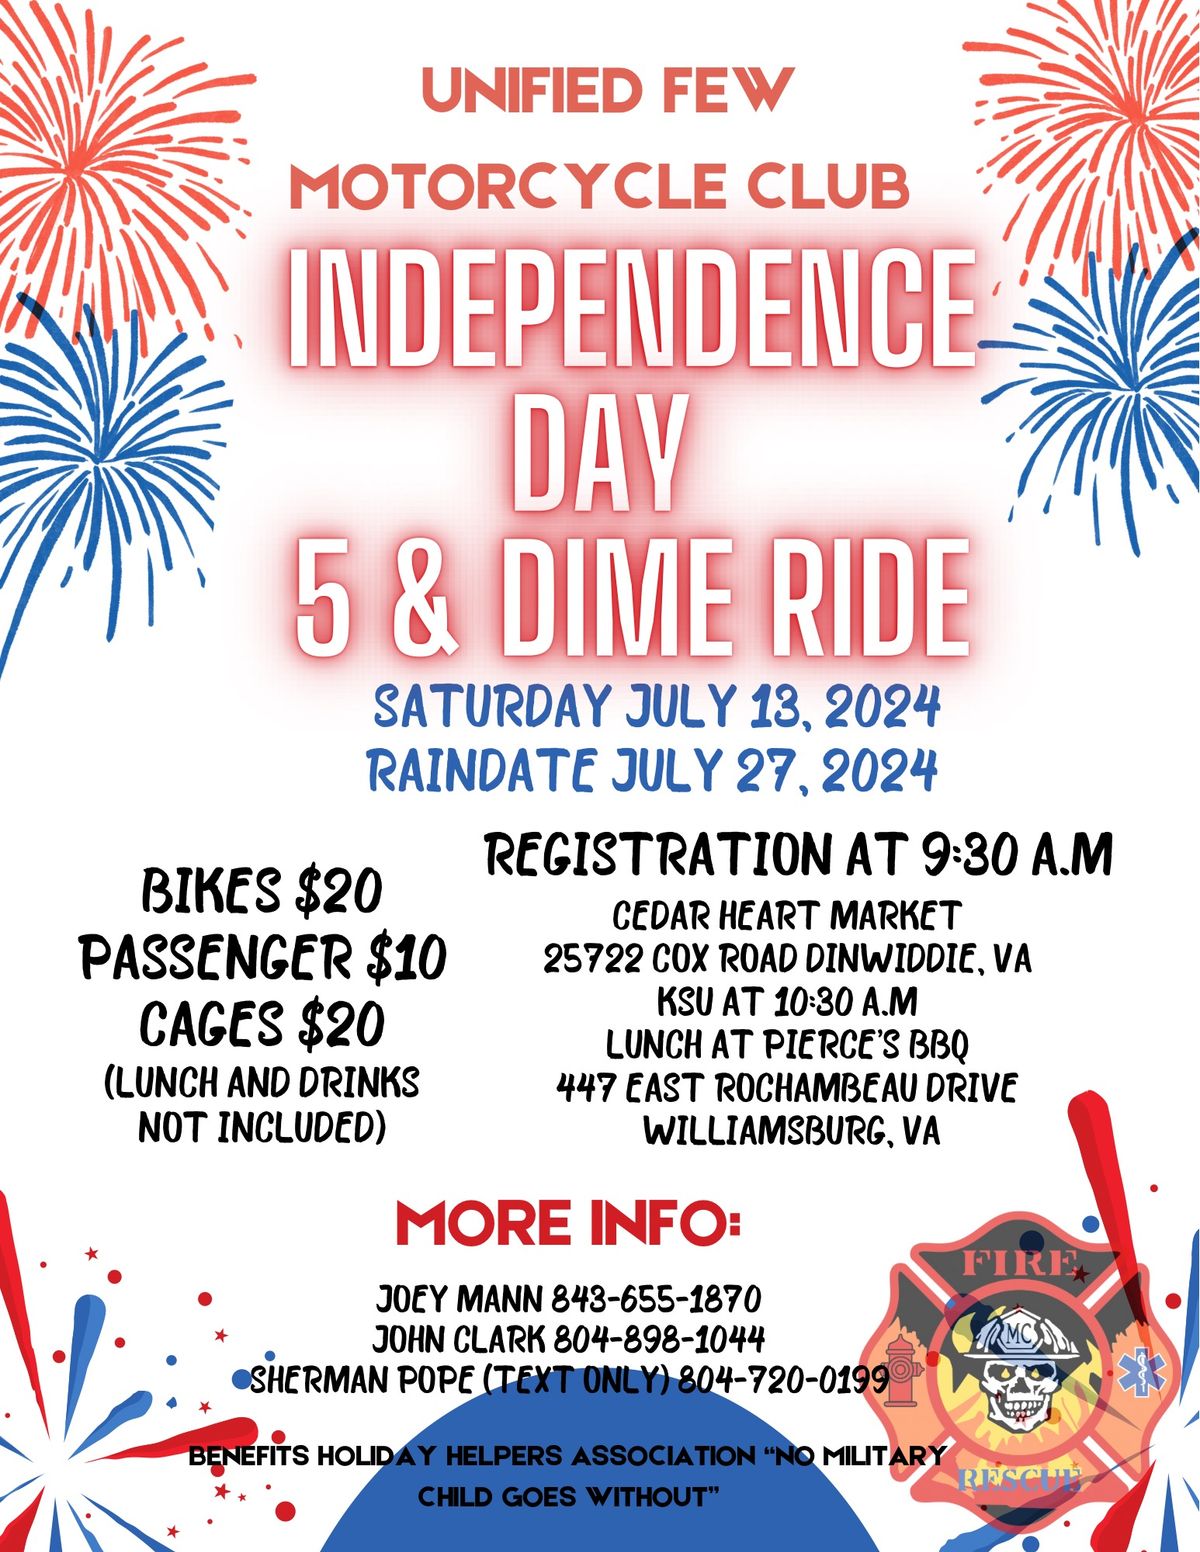 UFMC Independence Day 5 & Dime Ride